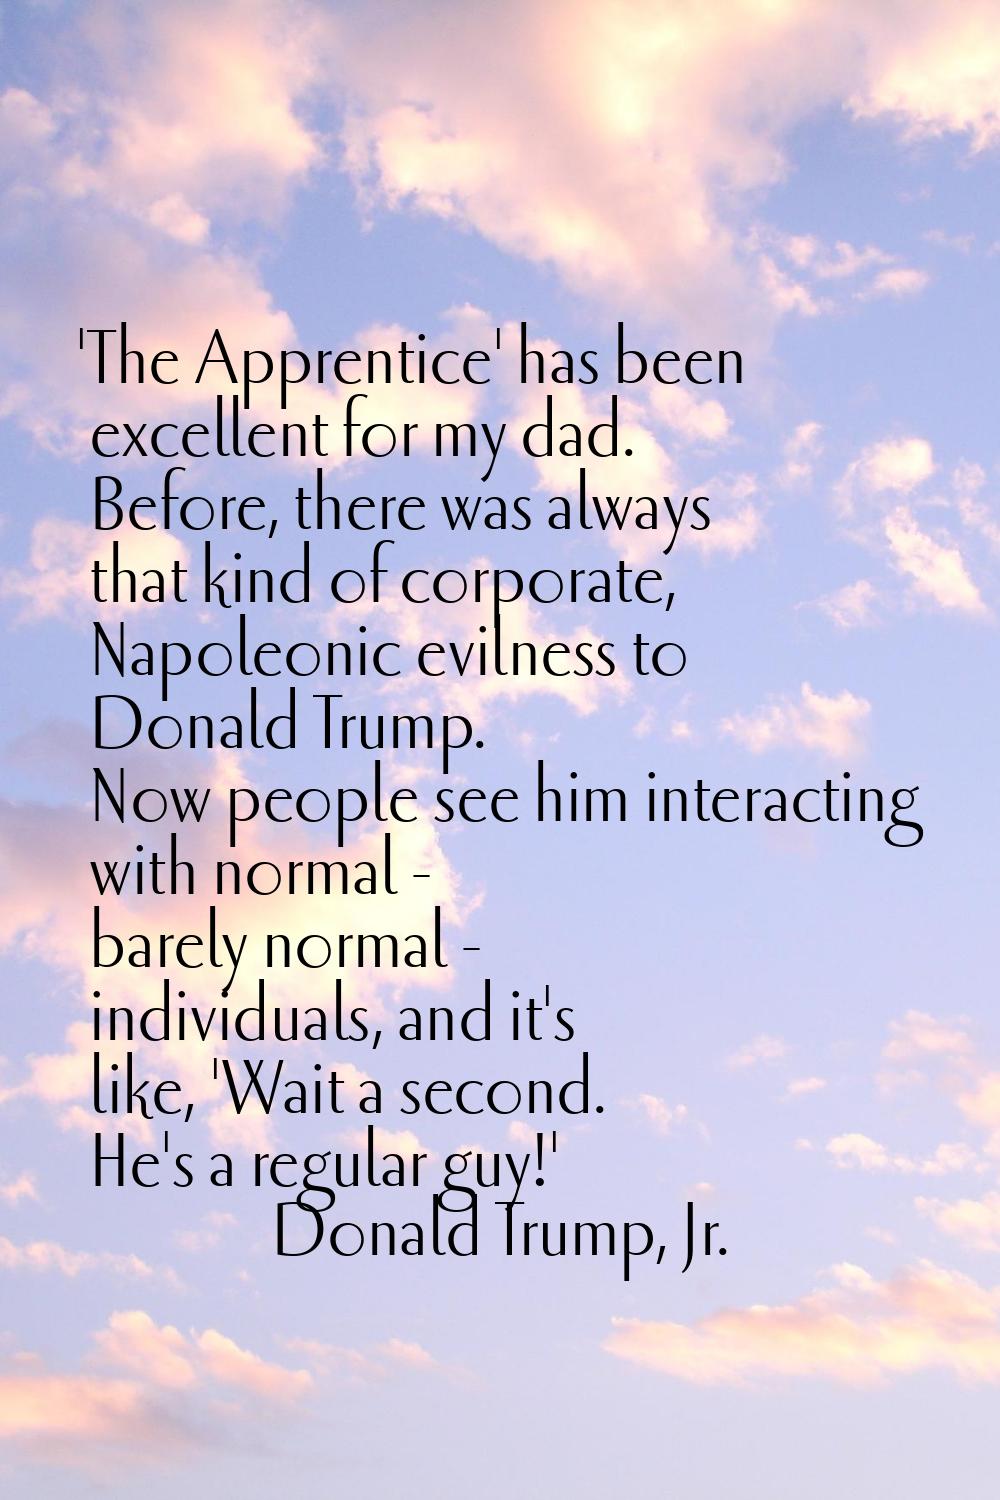 'The Apprentice' has been excellent for my dad. Before, there was always that kind of corporate, Na